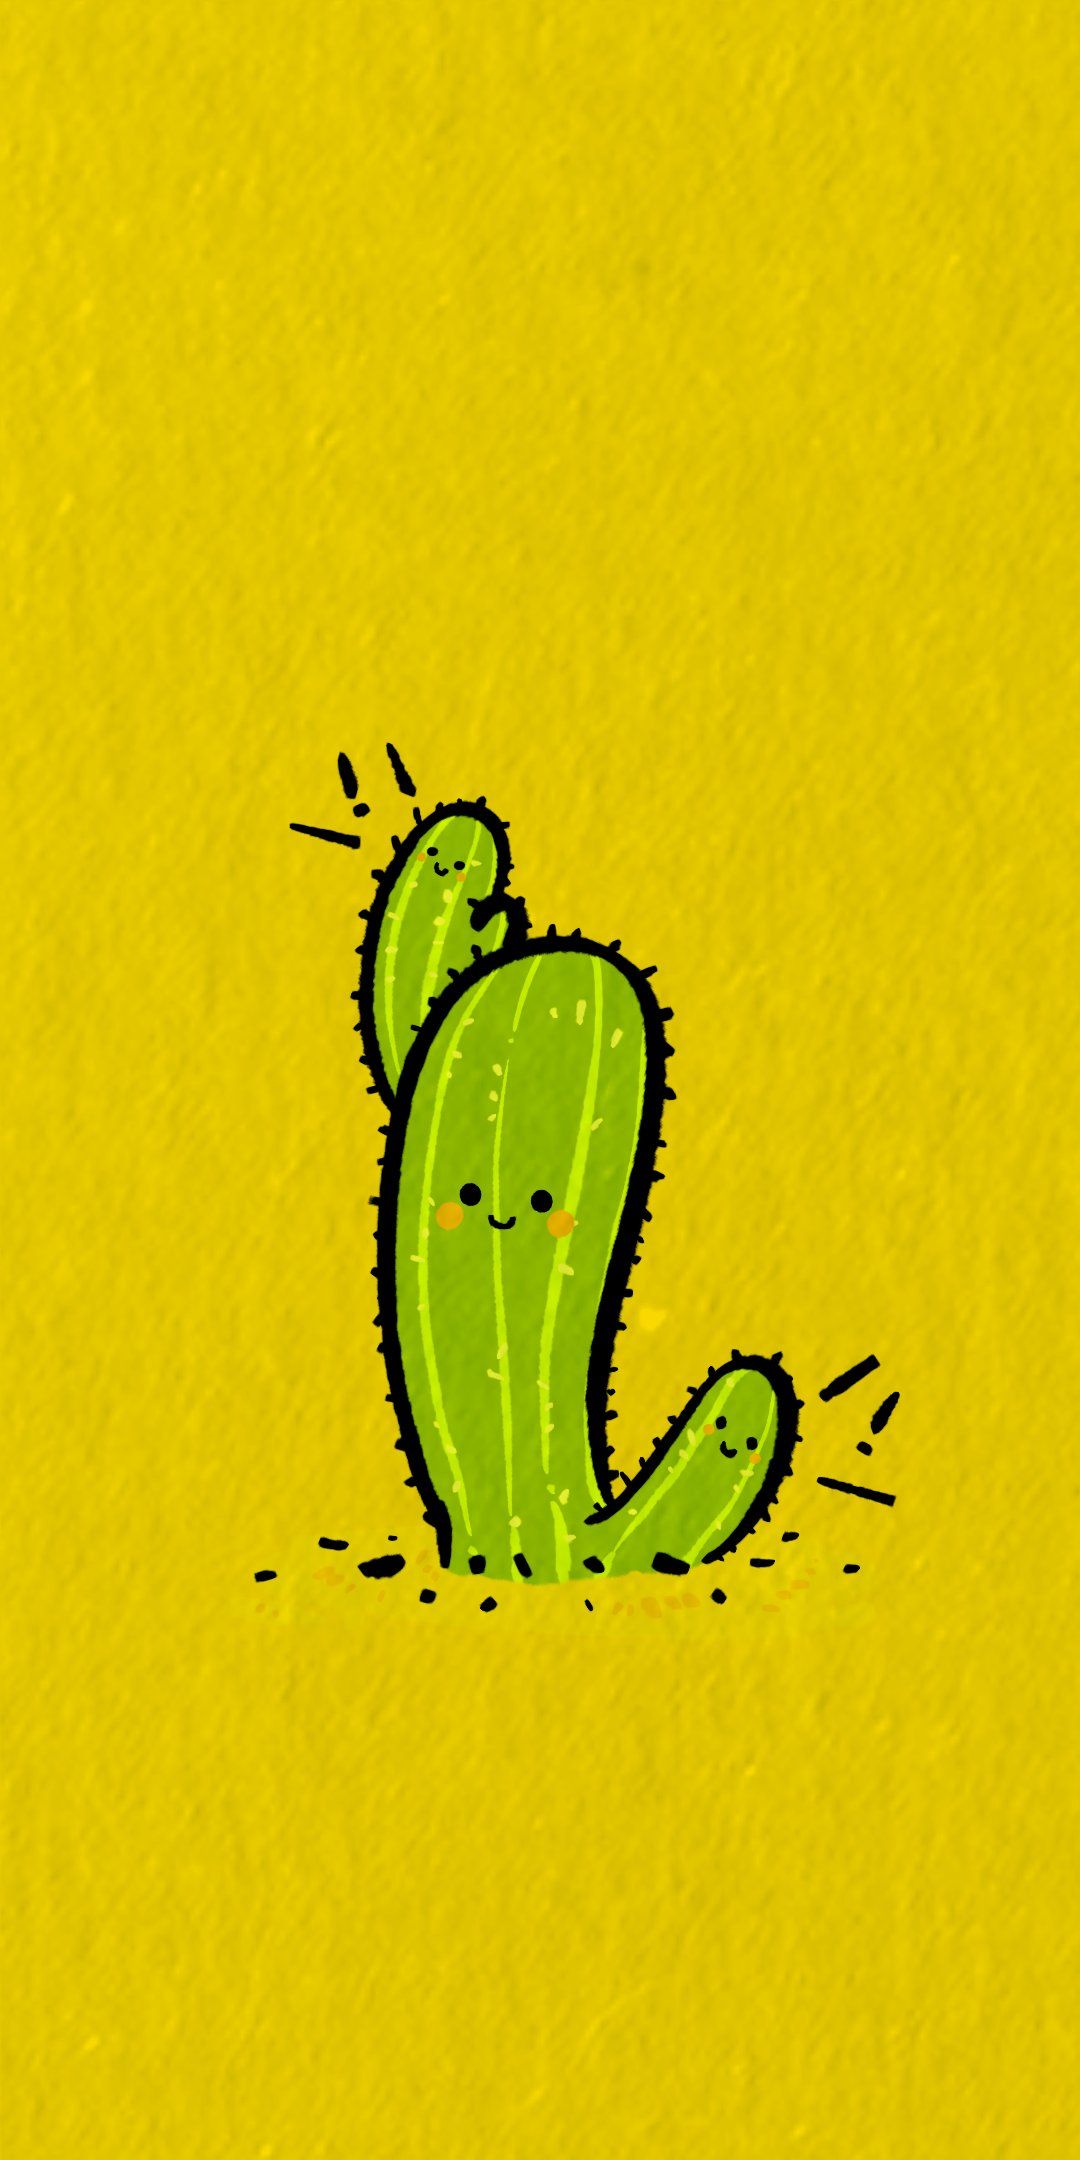 A cute little green and yellow cartoon of the desert - Cactus